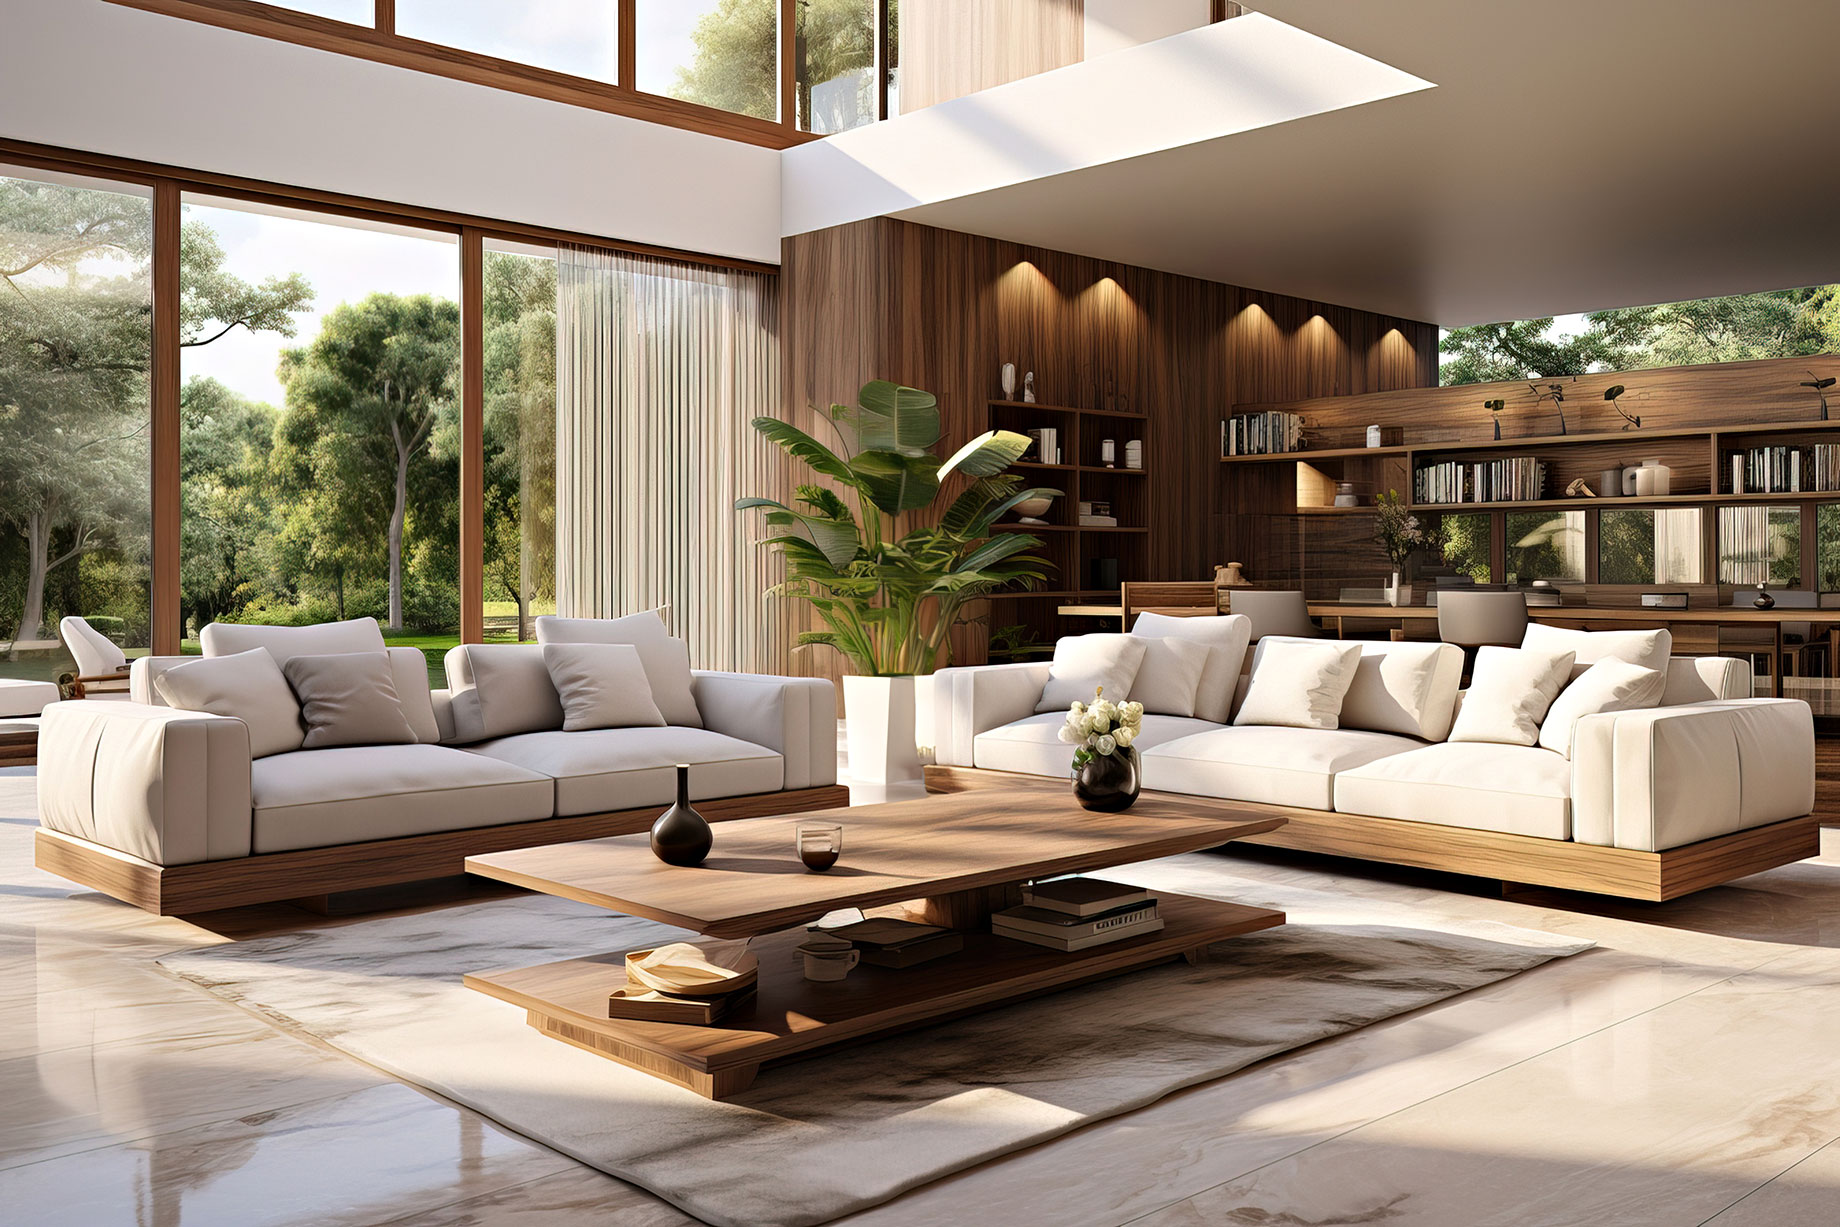 Earth Tones & Organic Palettes - Modern Living Room with White Couches, Marble Floors, and a Park View